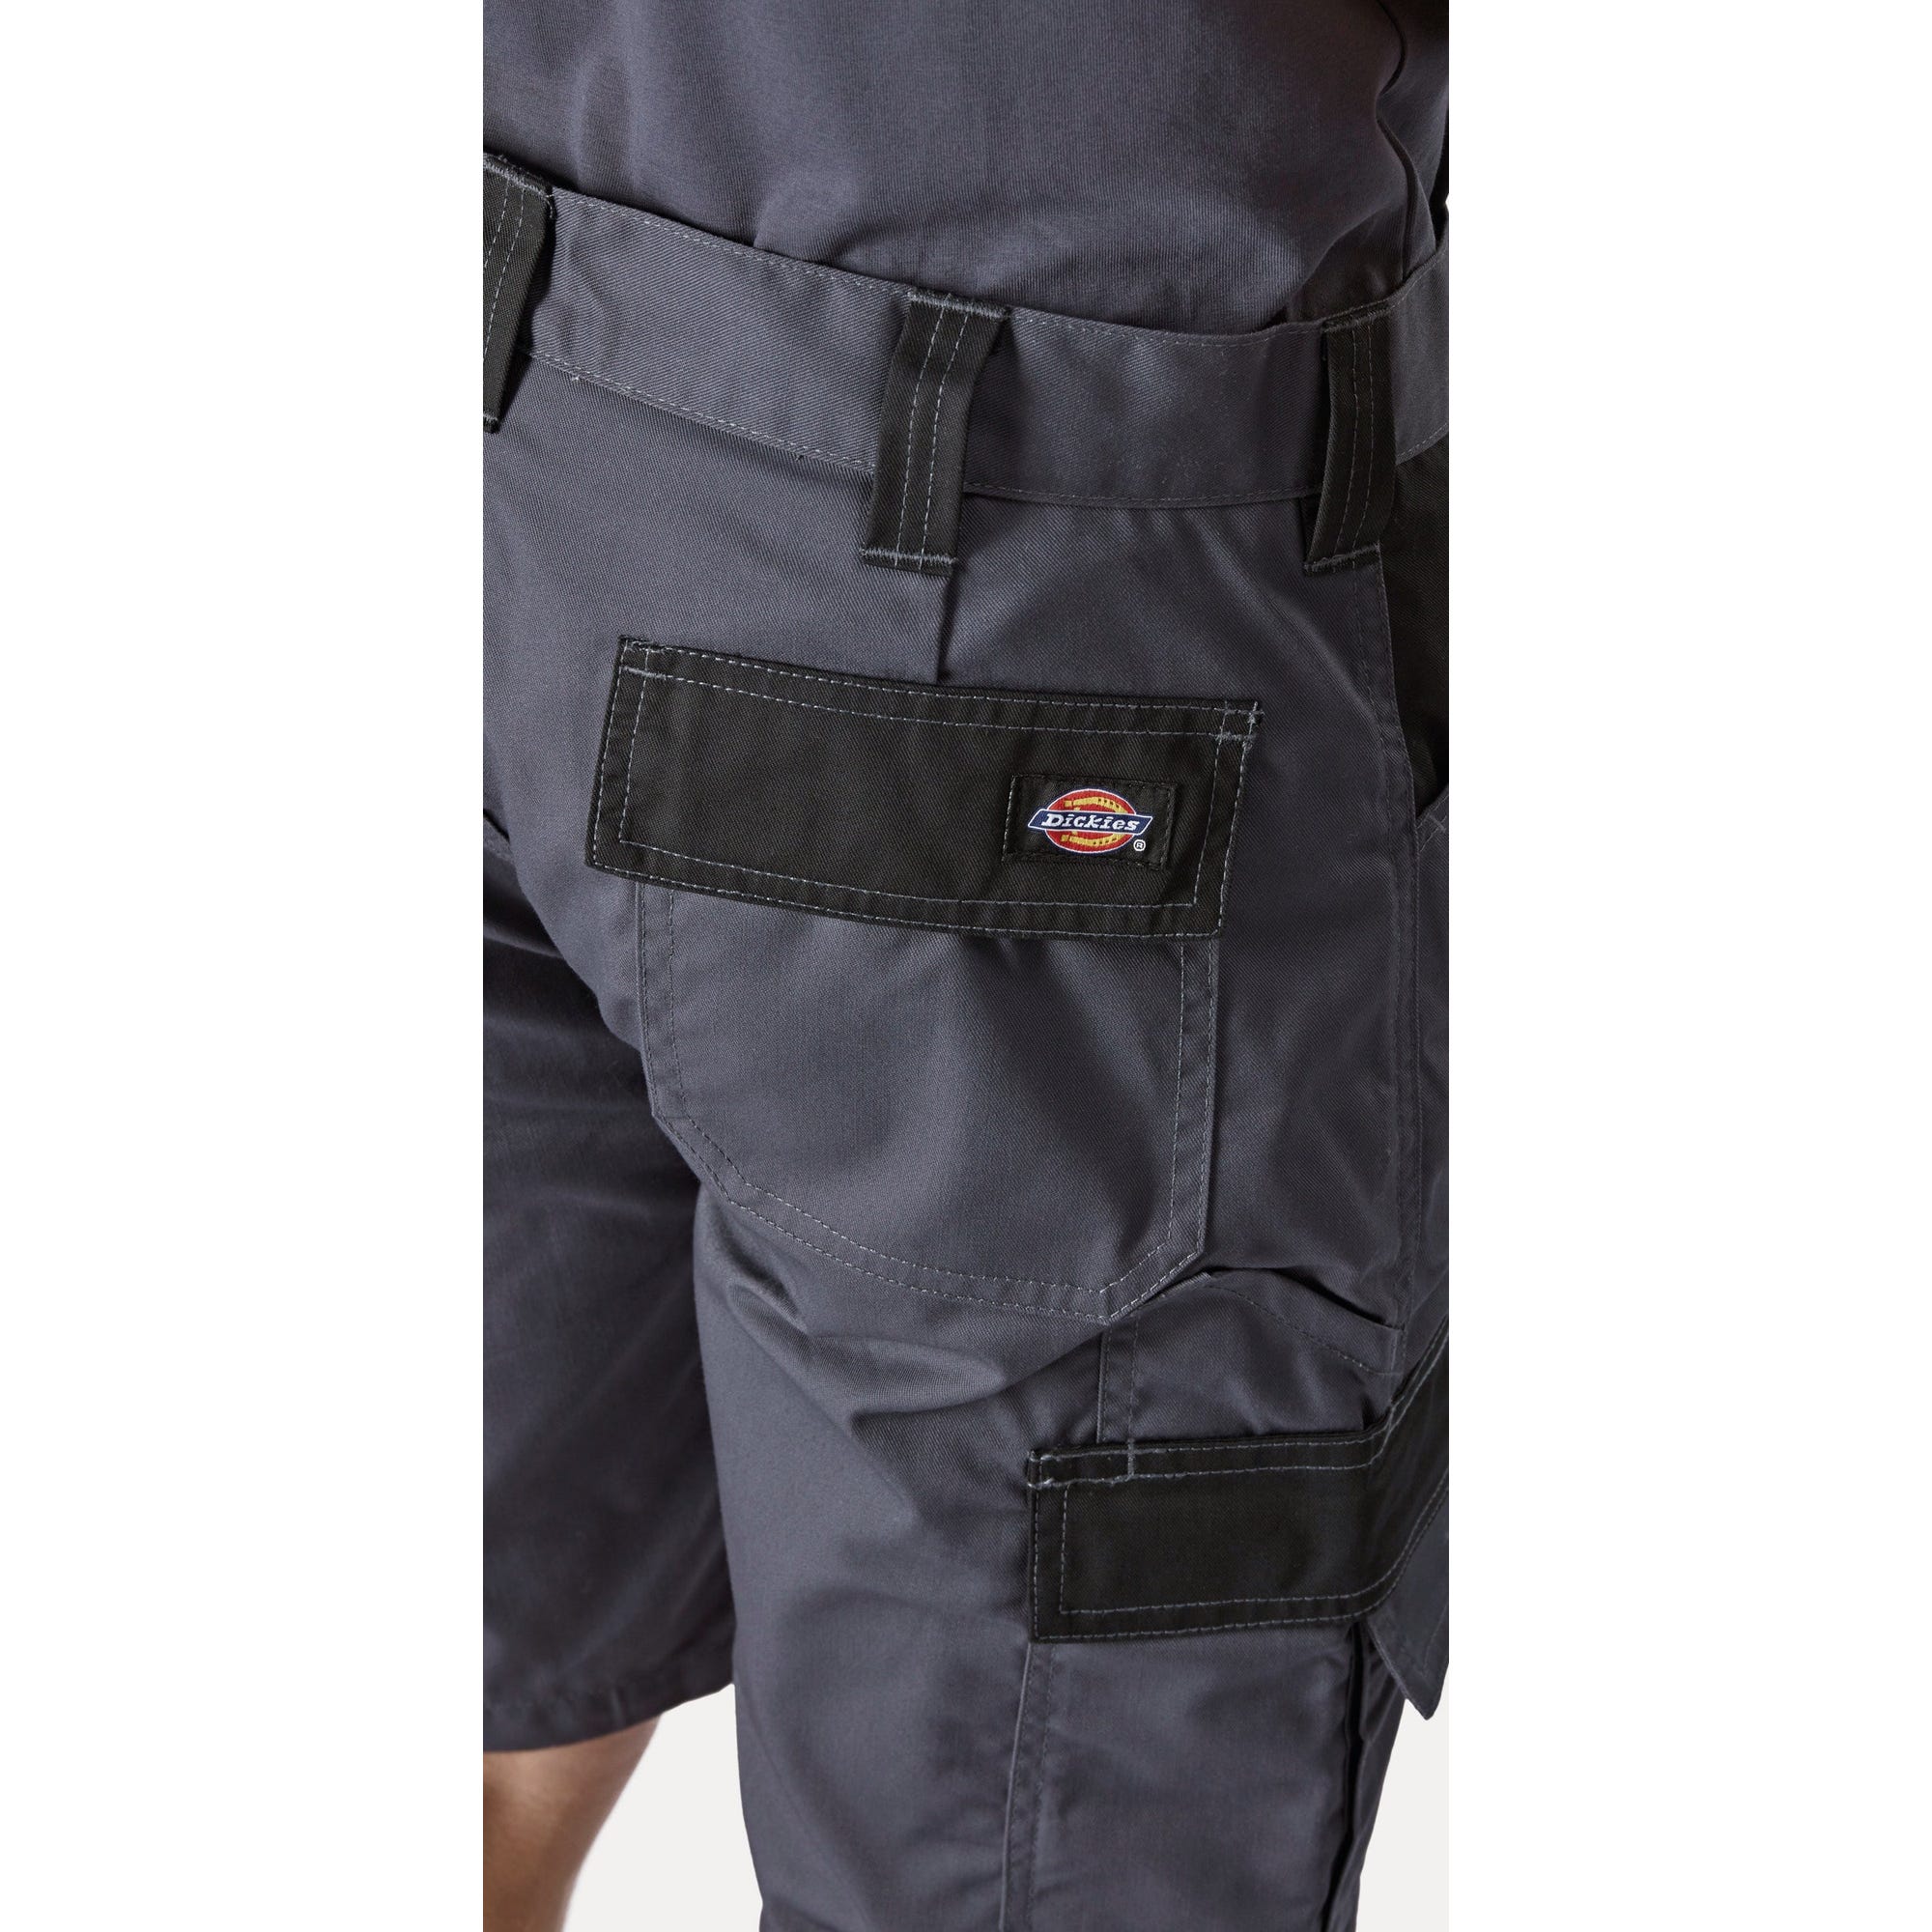 Short Everyday Noir - Dickies - Taille 40 8